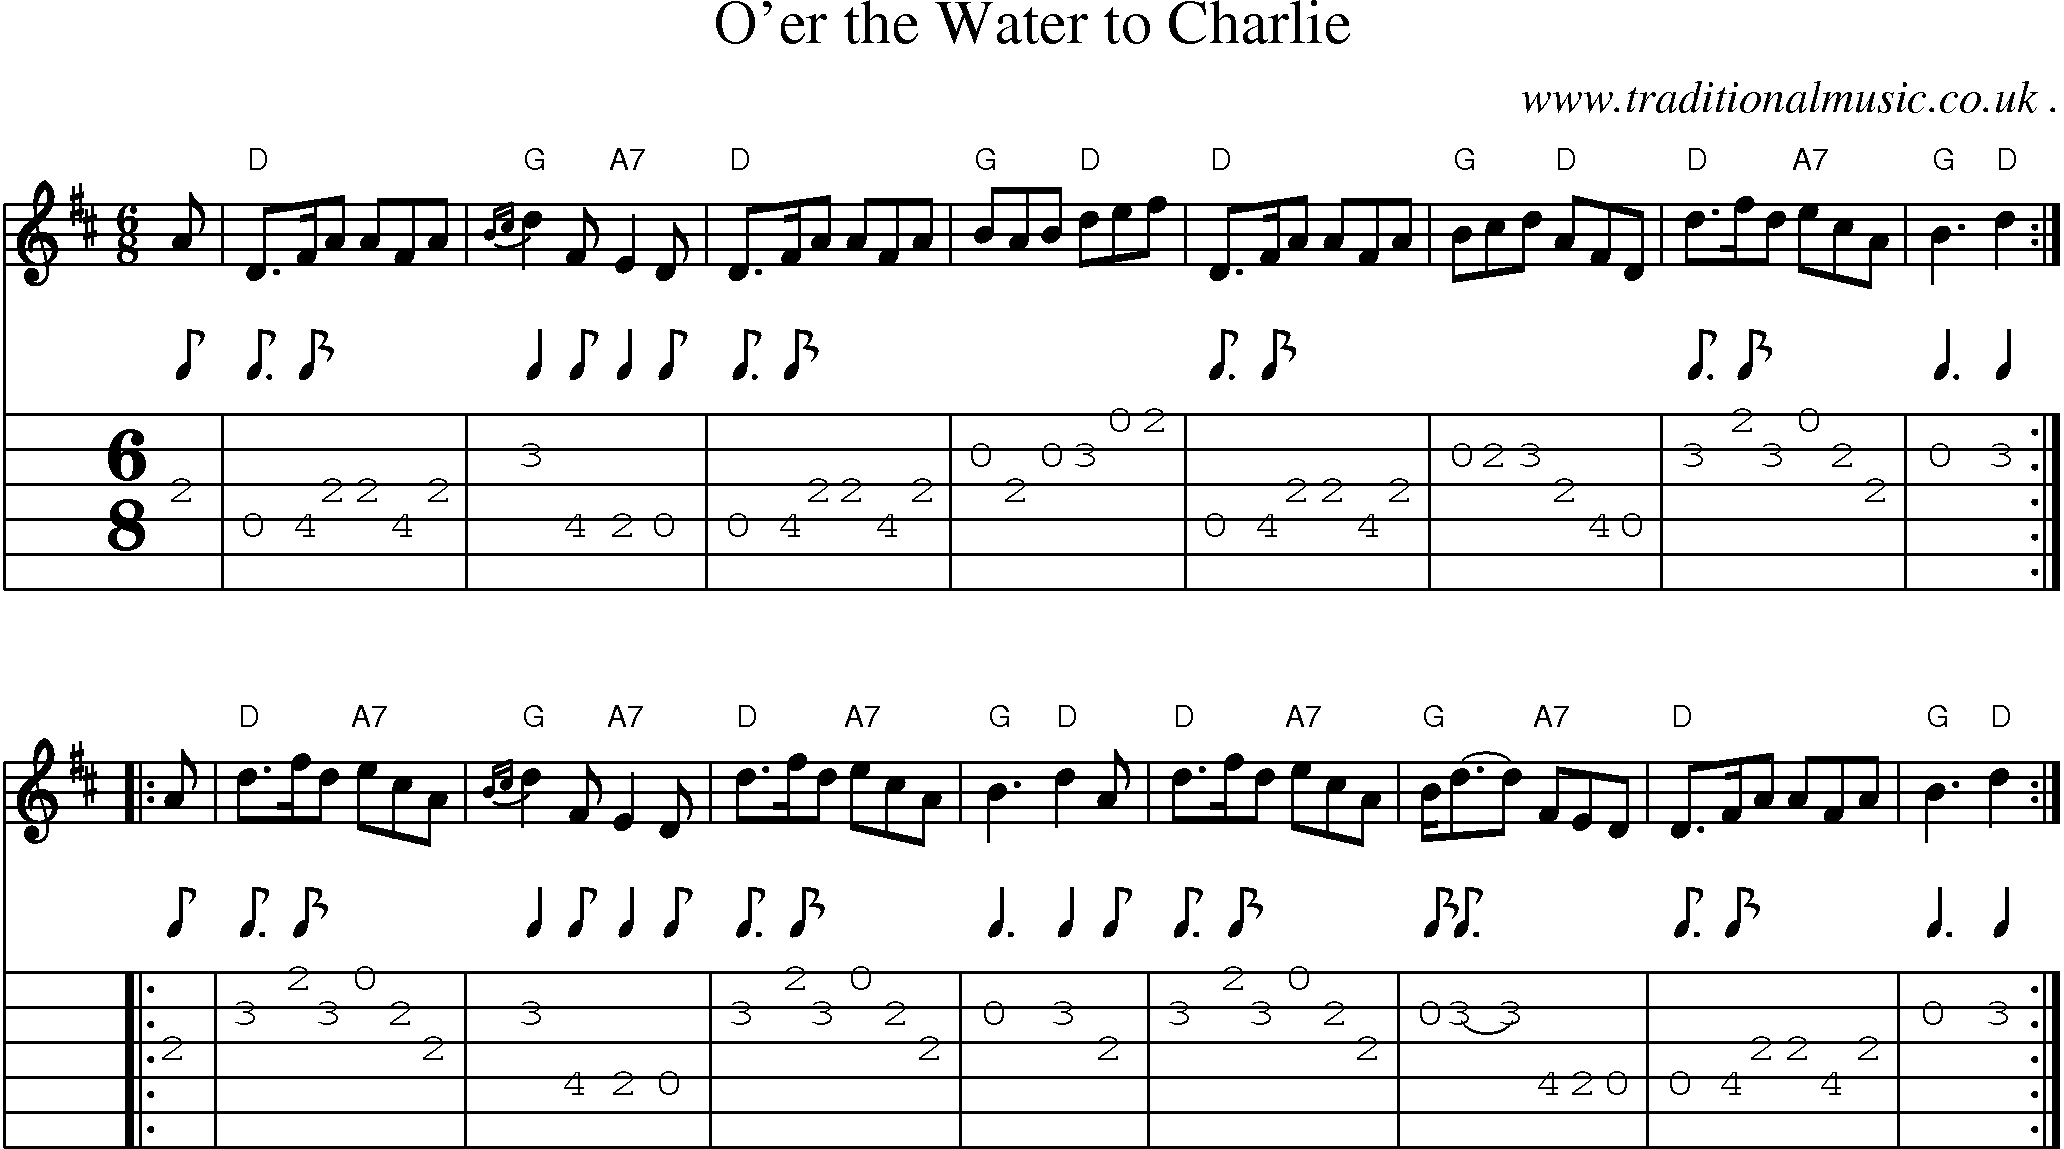 Sheet-music  score, Chords and Guitar Tabs for Oer The Water To Charlie